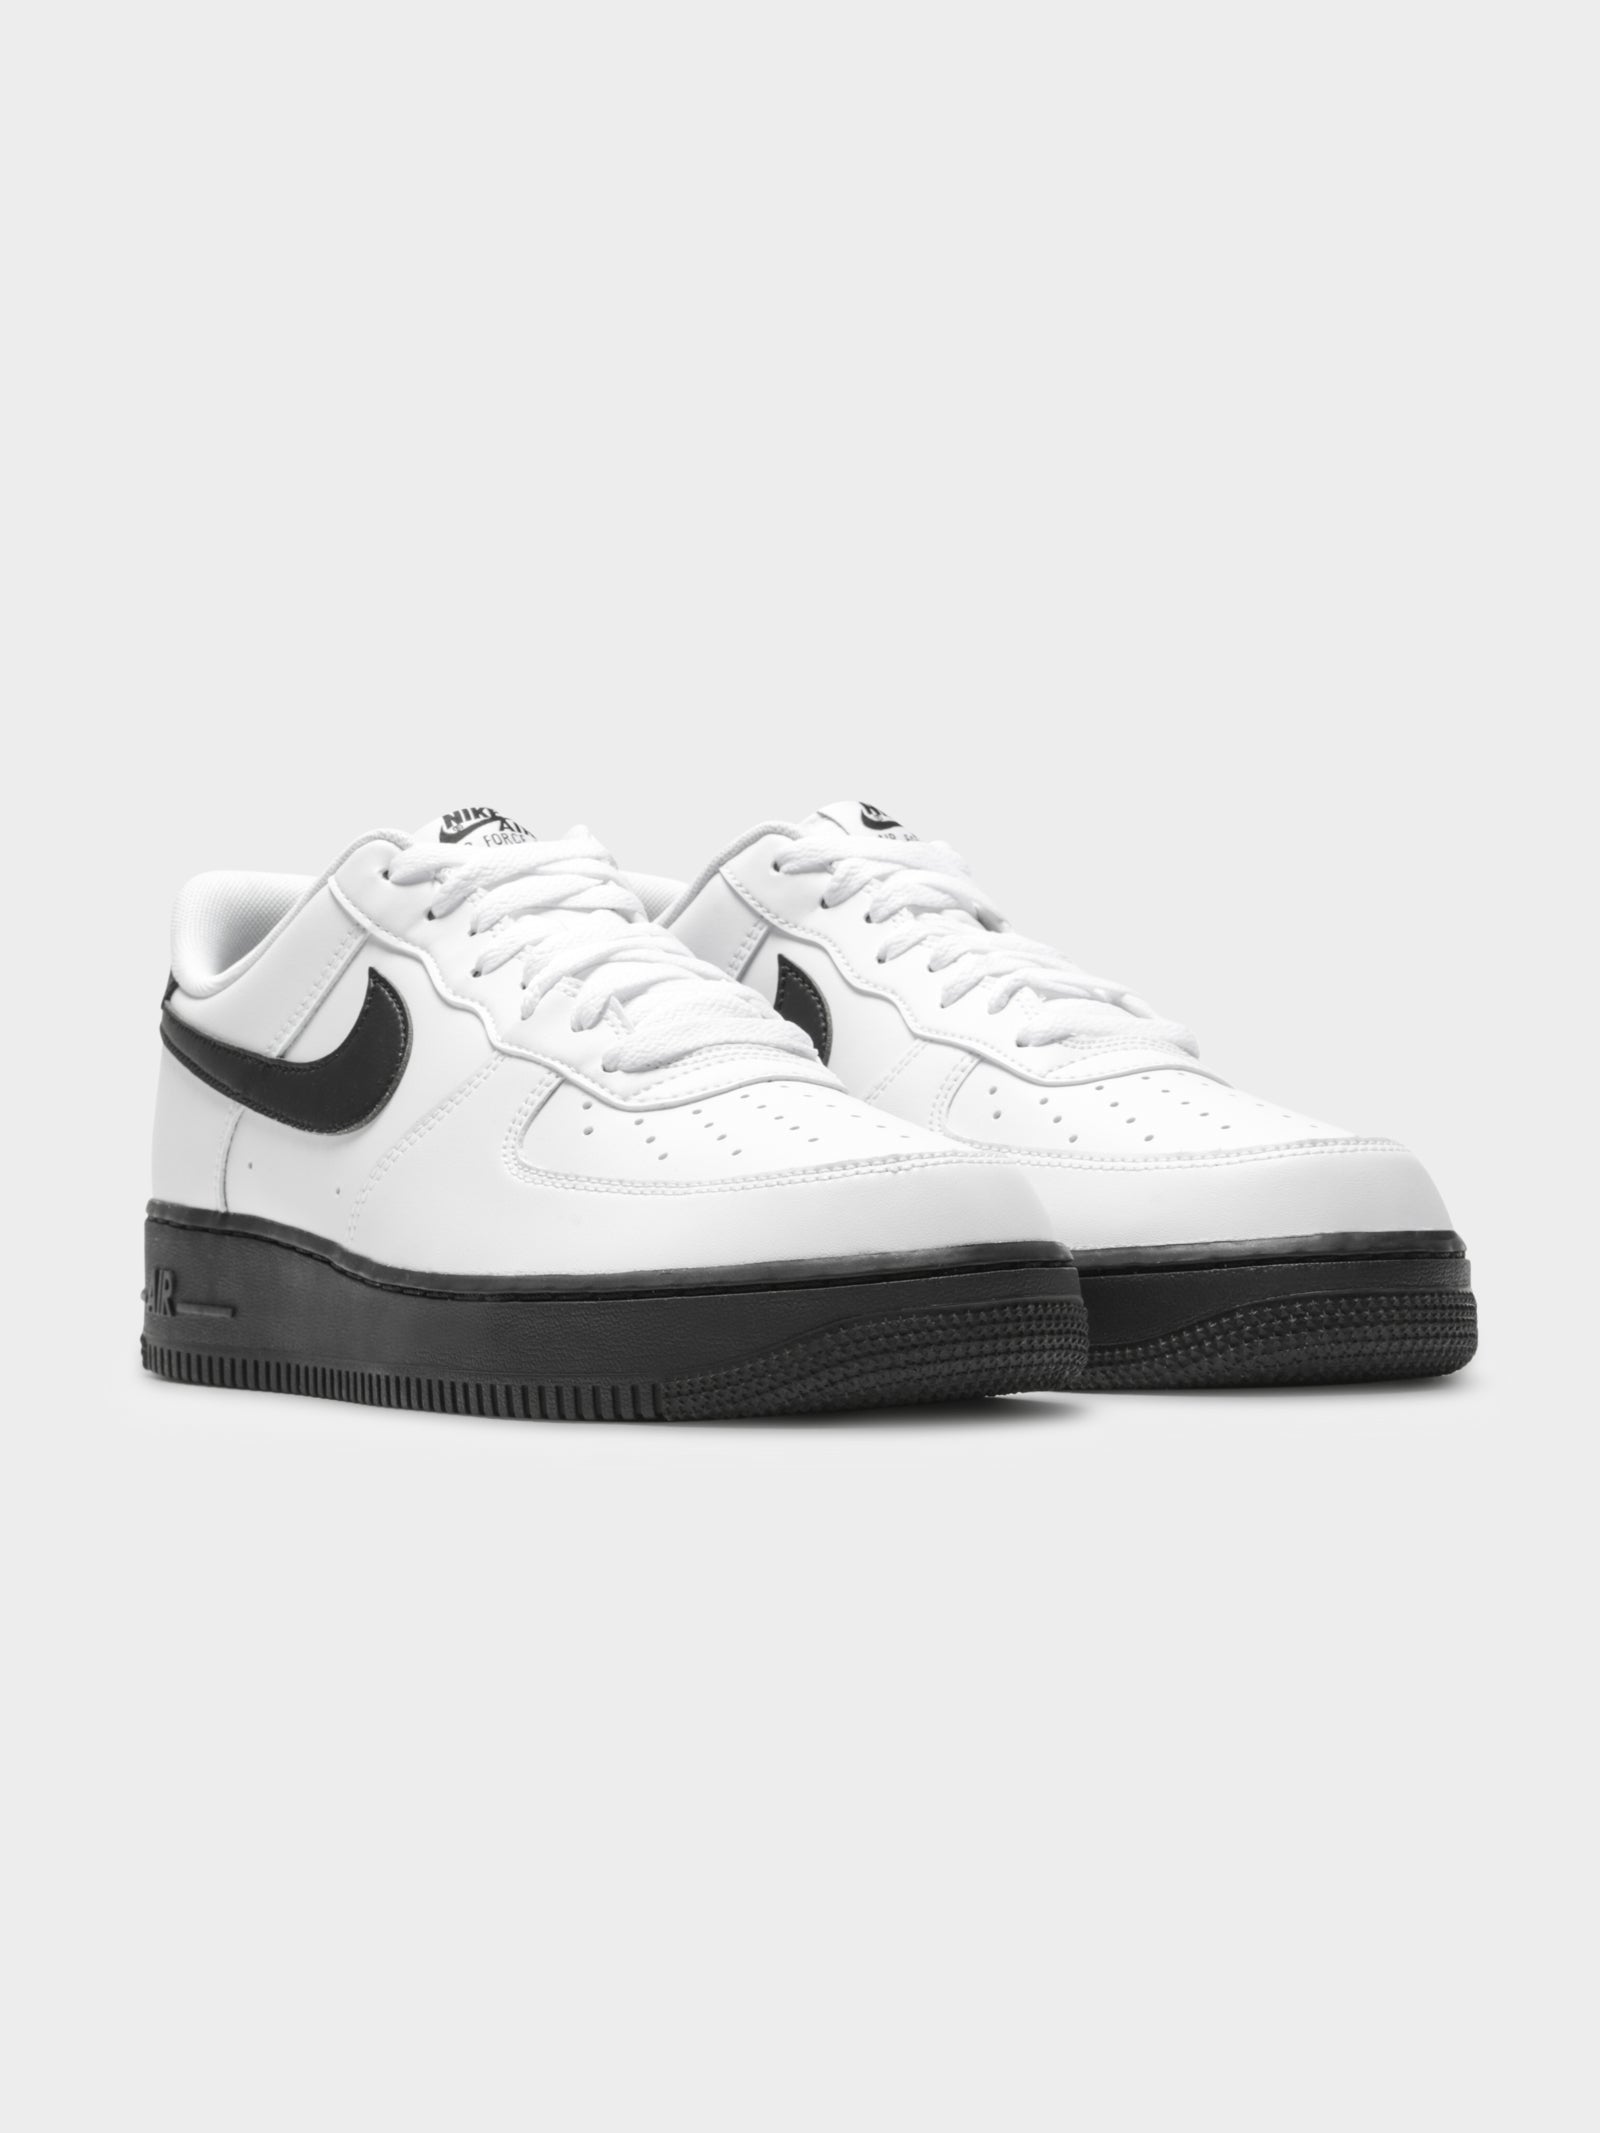 Unisex Air Force 1 '07 Sneakers in White & Black